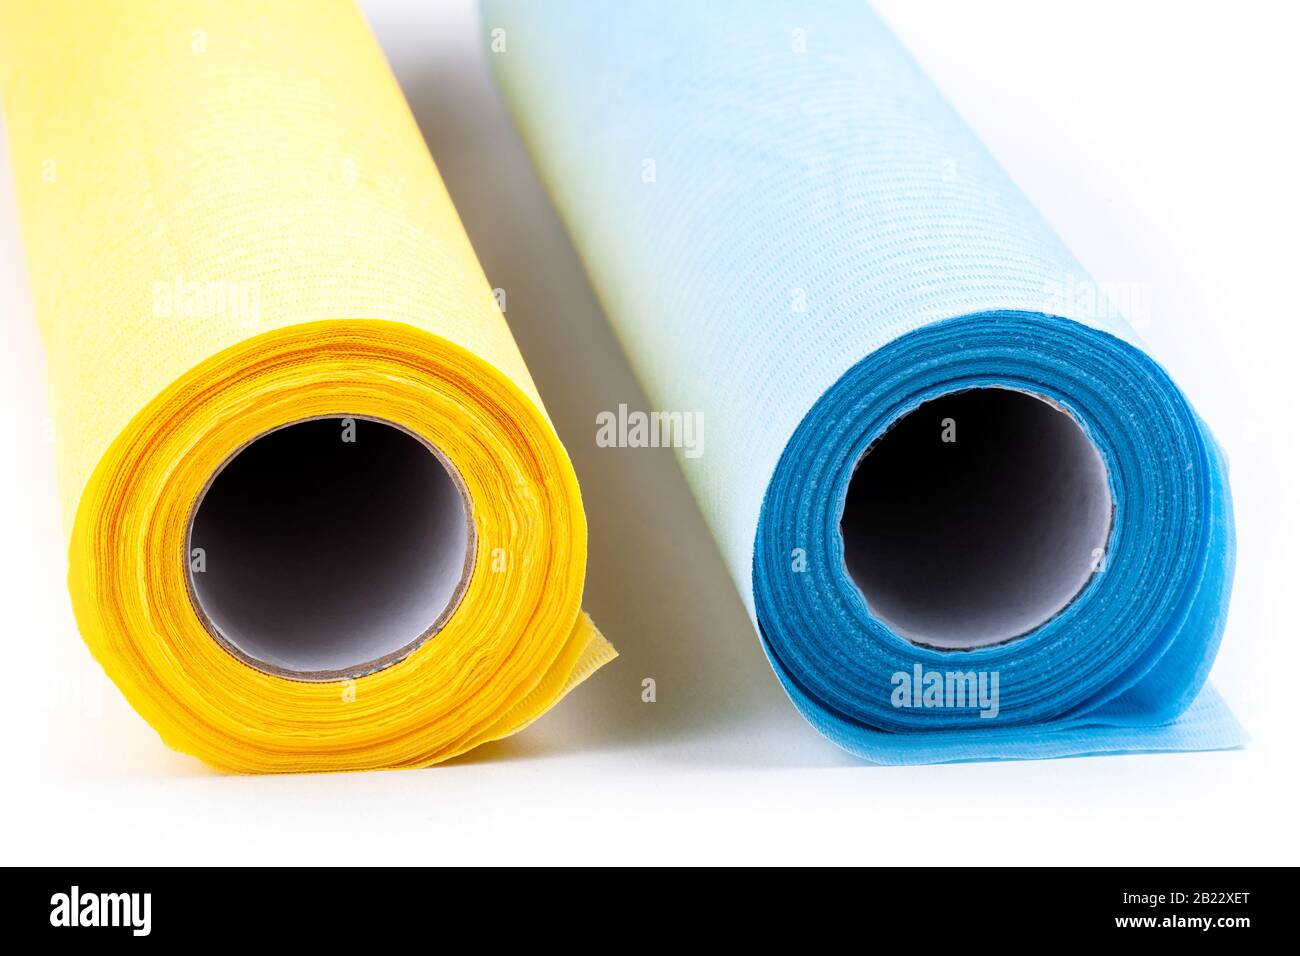 Simple new dental medical patient bibs, two rolls, yellow and blue on white, disposable bib water absorbing material, medical dental clinic safe clean Stock Photo